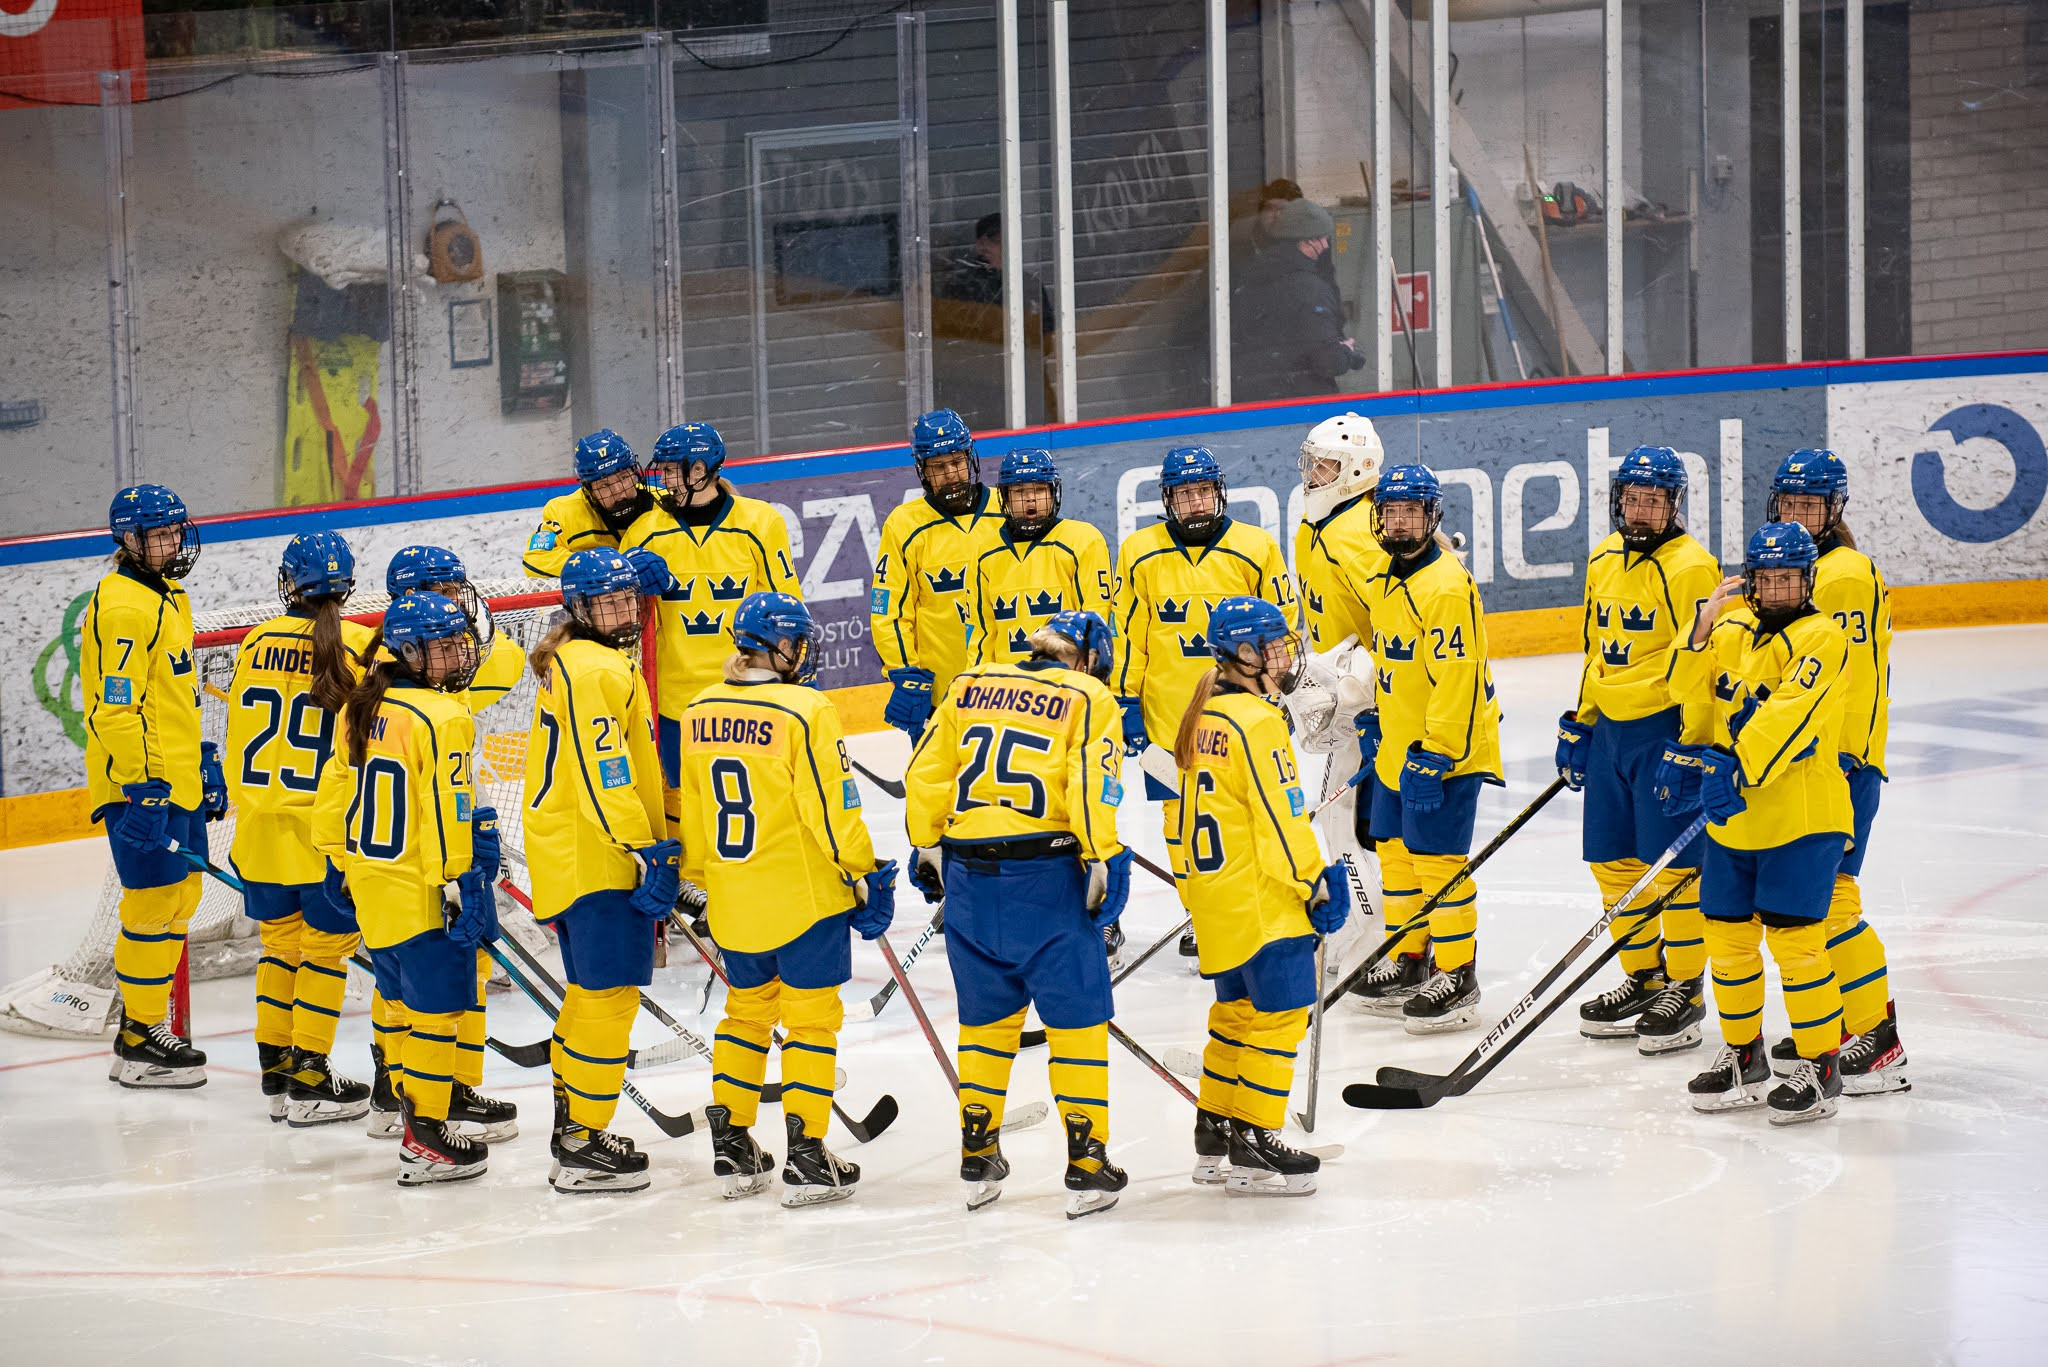 Sweden are also into the girls' ice hockey final, topping Group B with a dramatic 4-3 overtime win against hosts Finland ©Hannu Kilpeläinen/EYOF 2022 Vuokatti